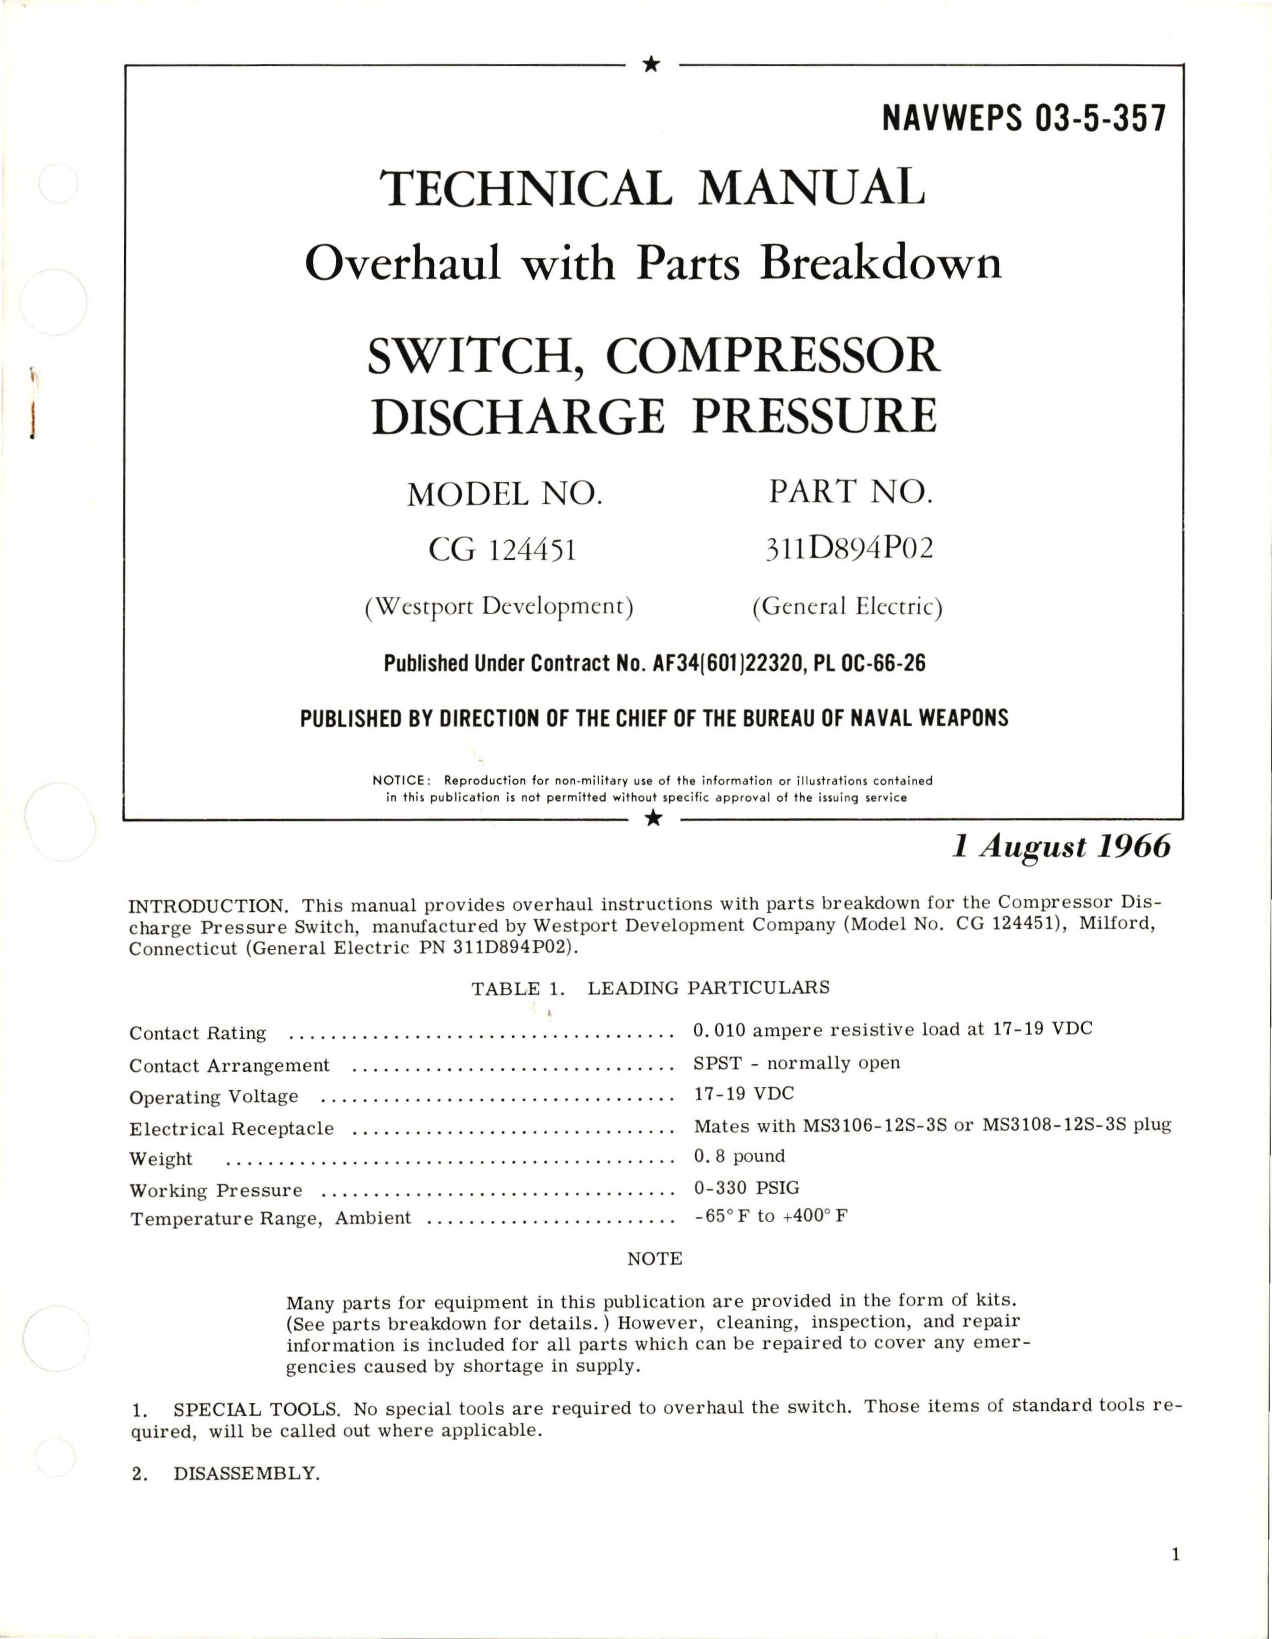 Sample page 1 from AirCorps Library document: Overhaul with Parts Breakdown for Compressor Discharge Pressure Switch - Model CG 124451 - Part 311D894P02